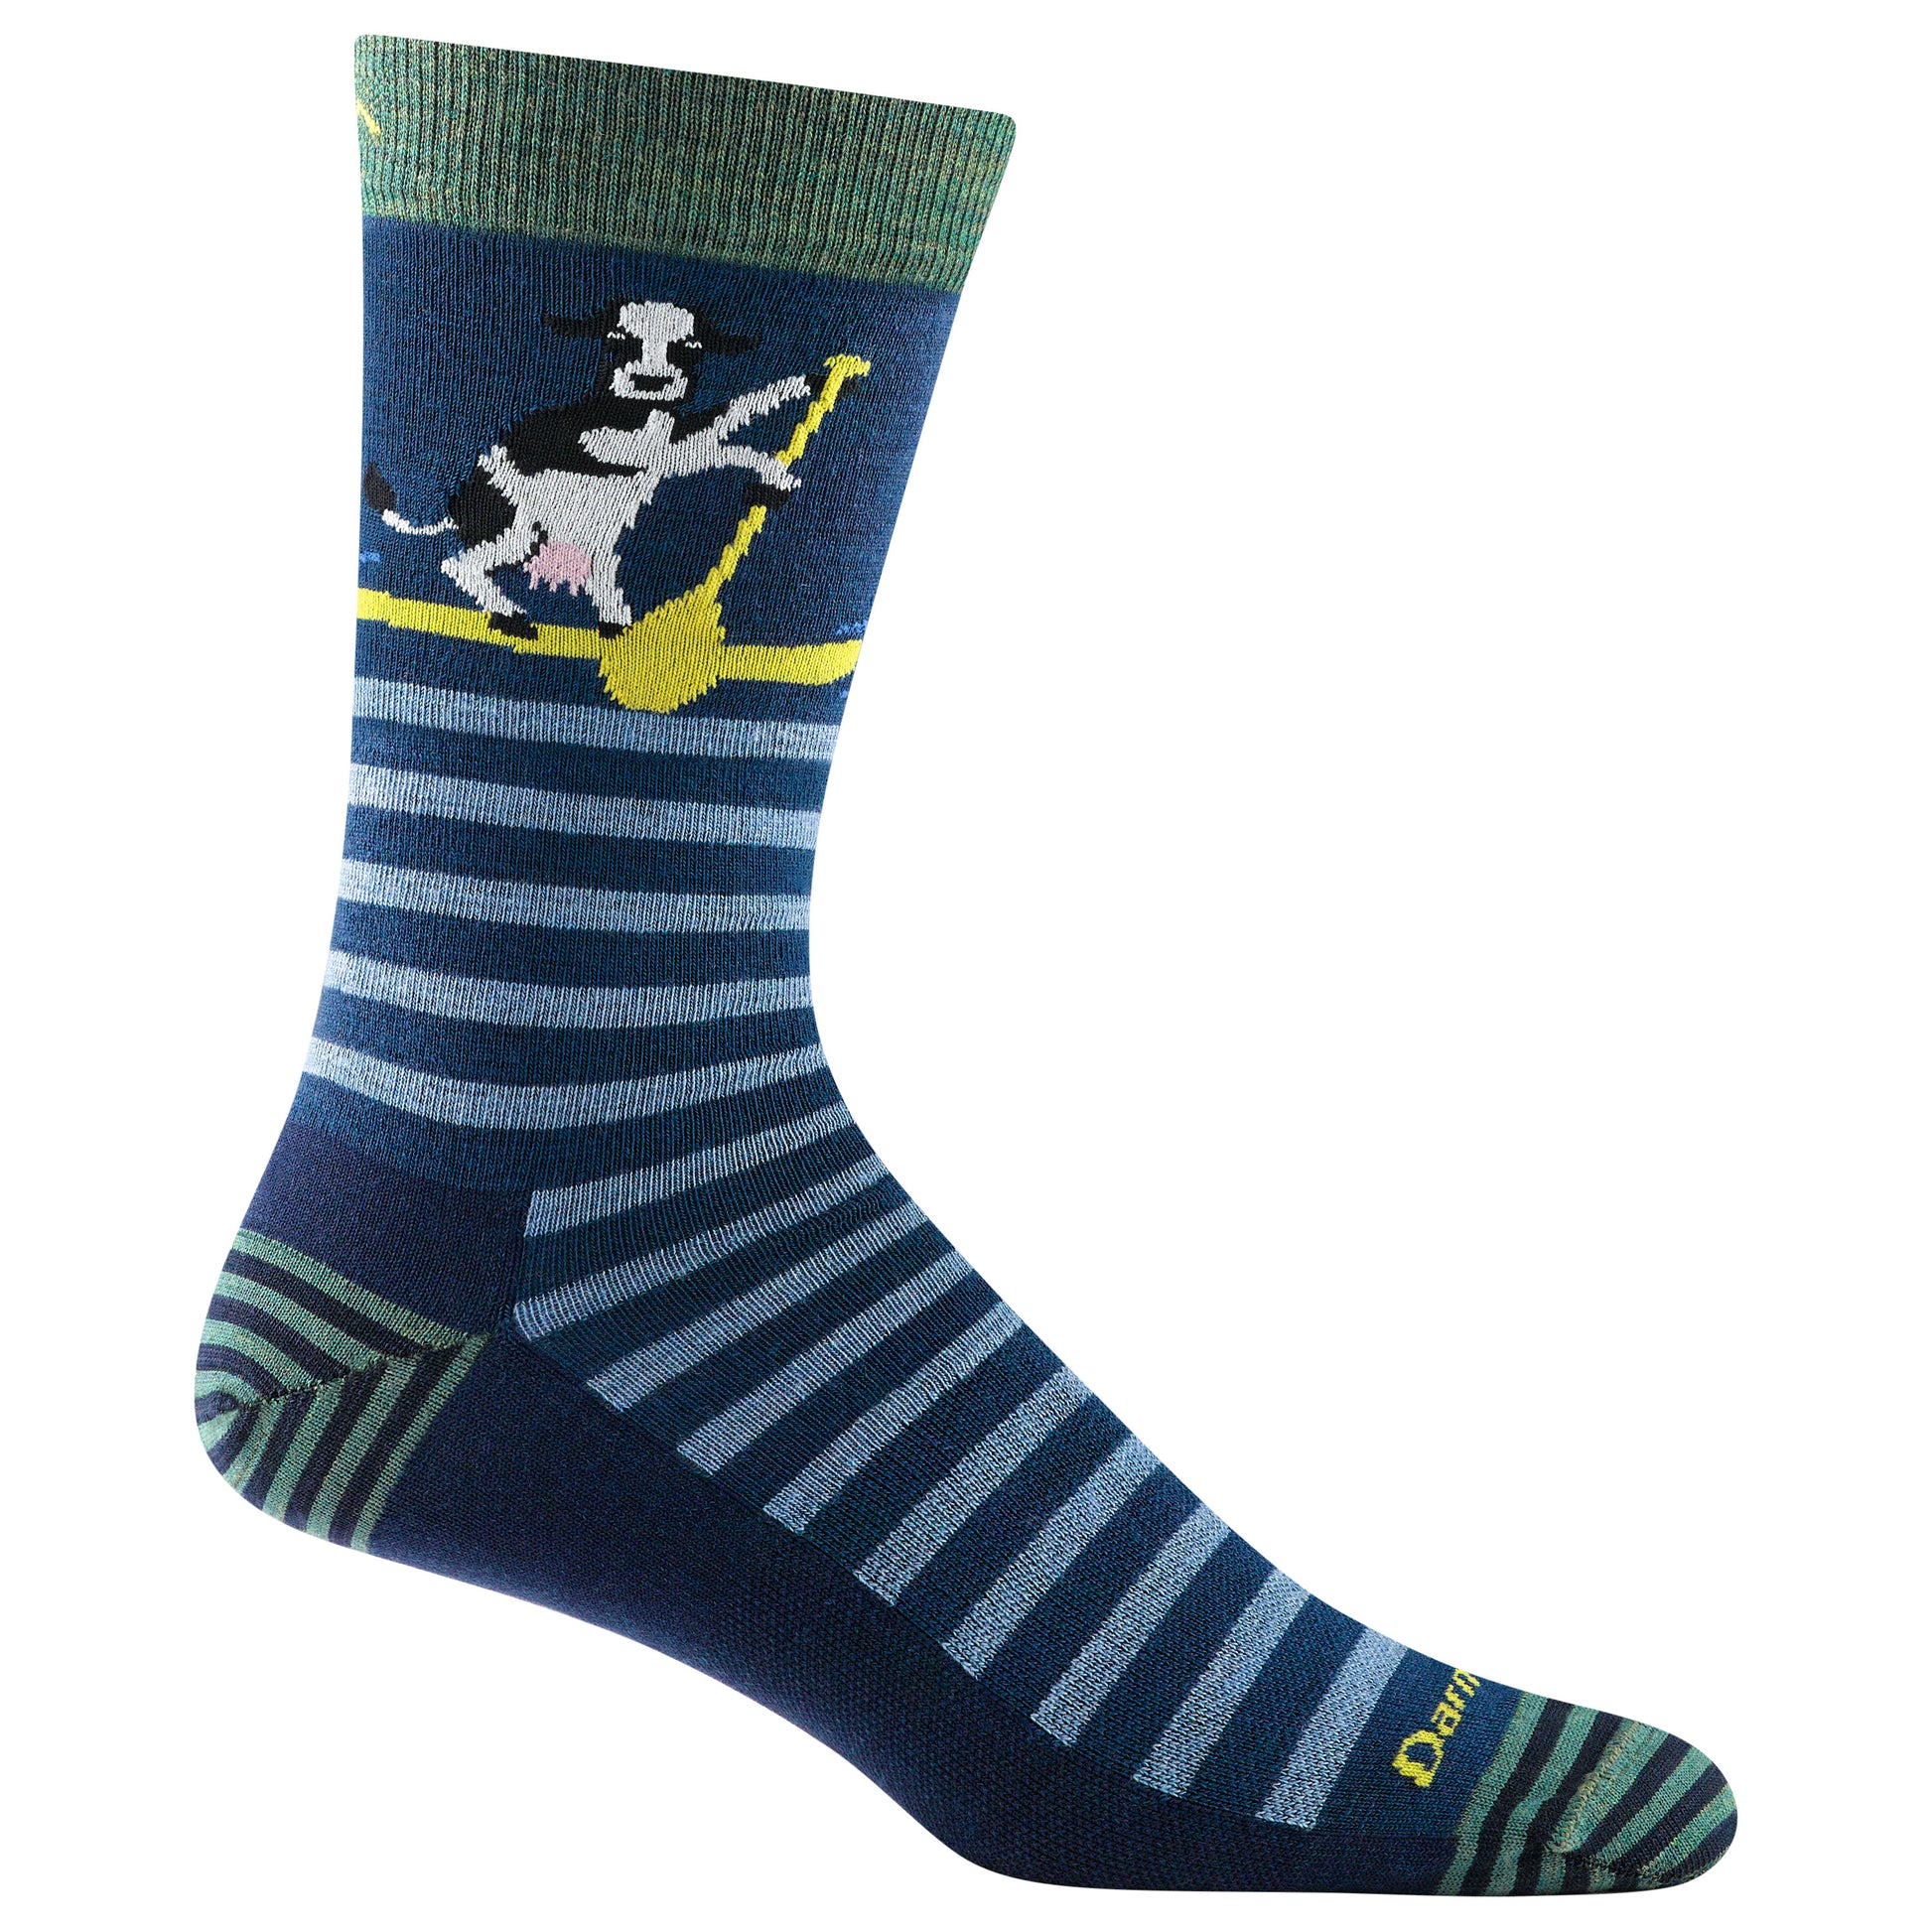 Darn tough men's 6066 midnight socks with cow paddling on board